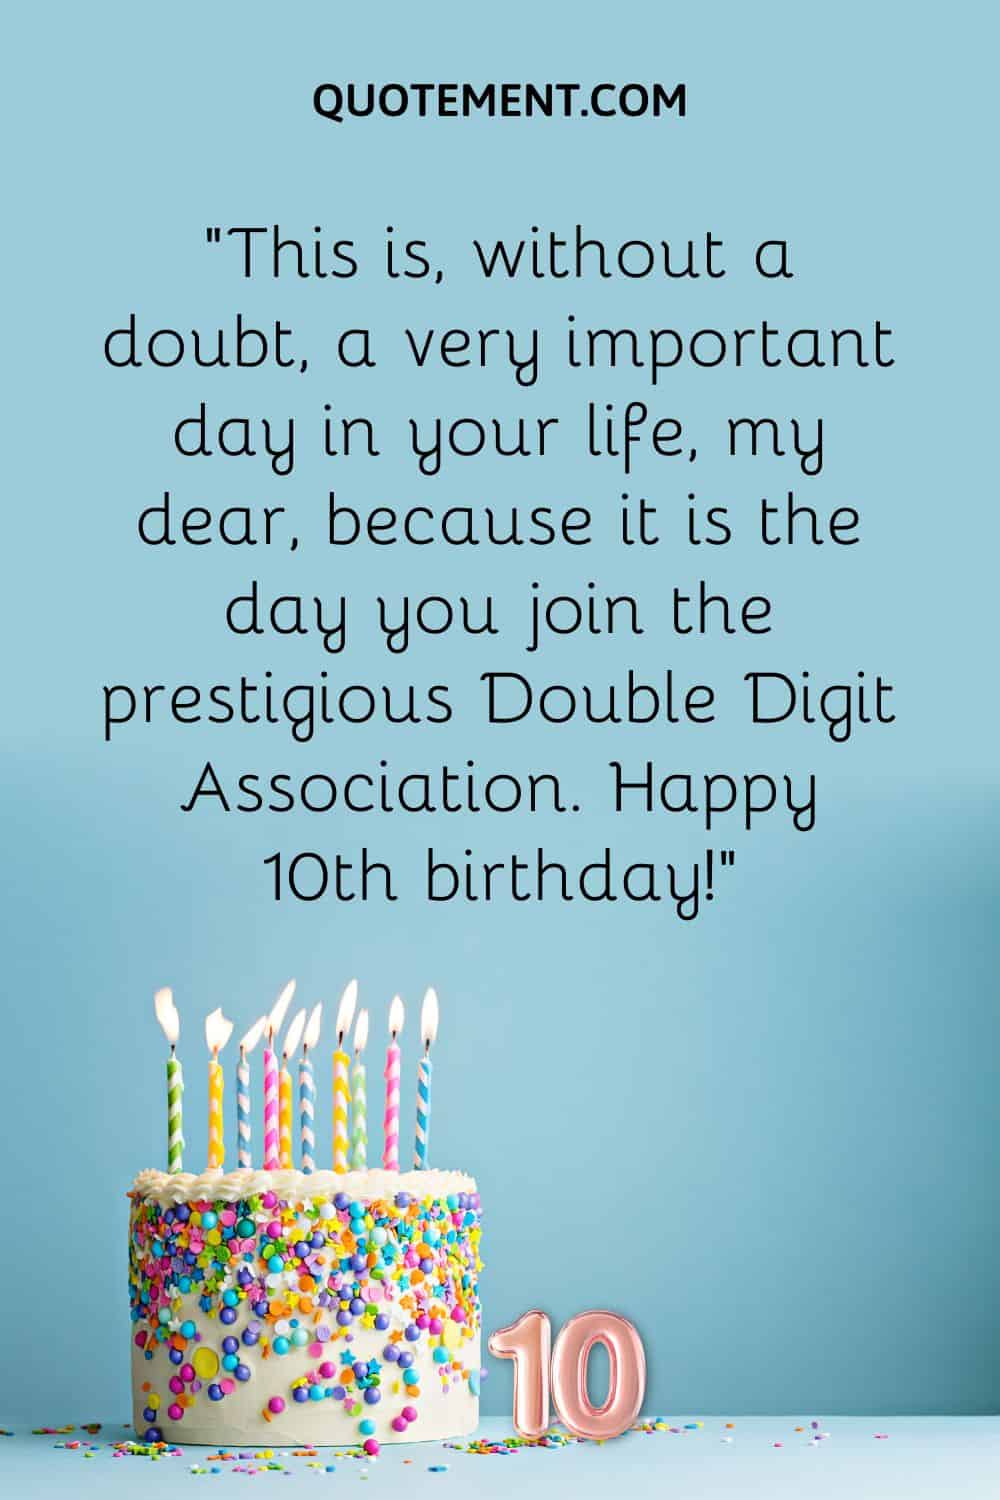 “This is, without a doubt, a very important day in your life, my dear, because it is the day you join the prestigious Double Digit Association. Happy 10th birthday!”